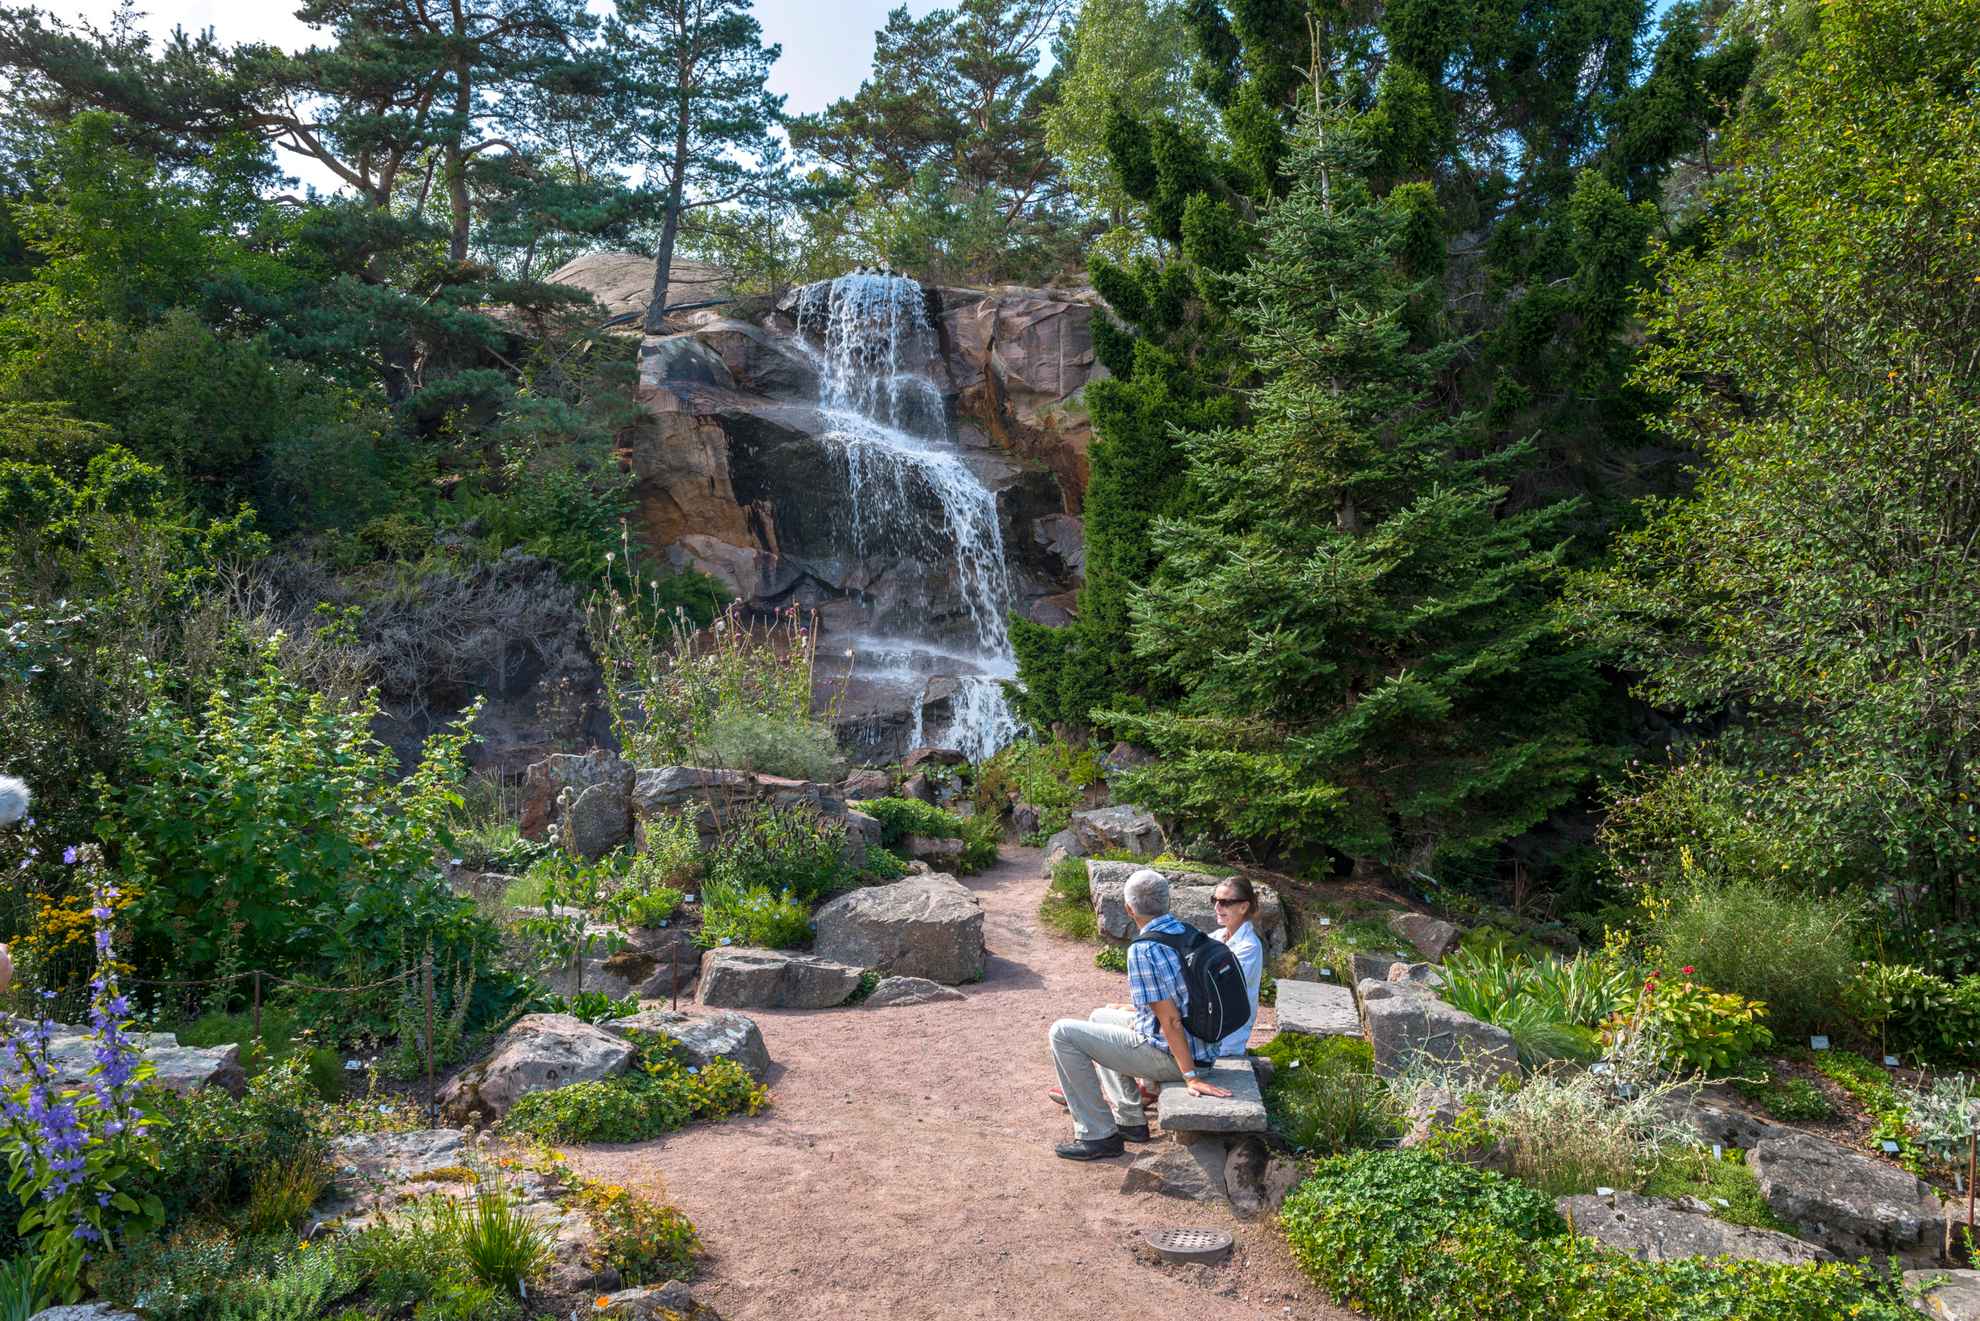 A couple sits on a park bench overlooking a small artificial waterfall in Gothenburg Botanical Garden.